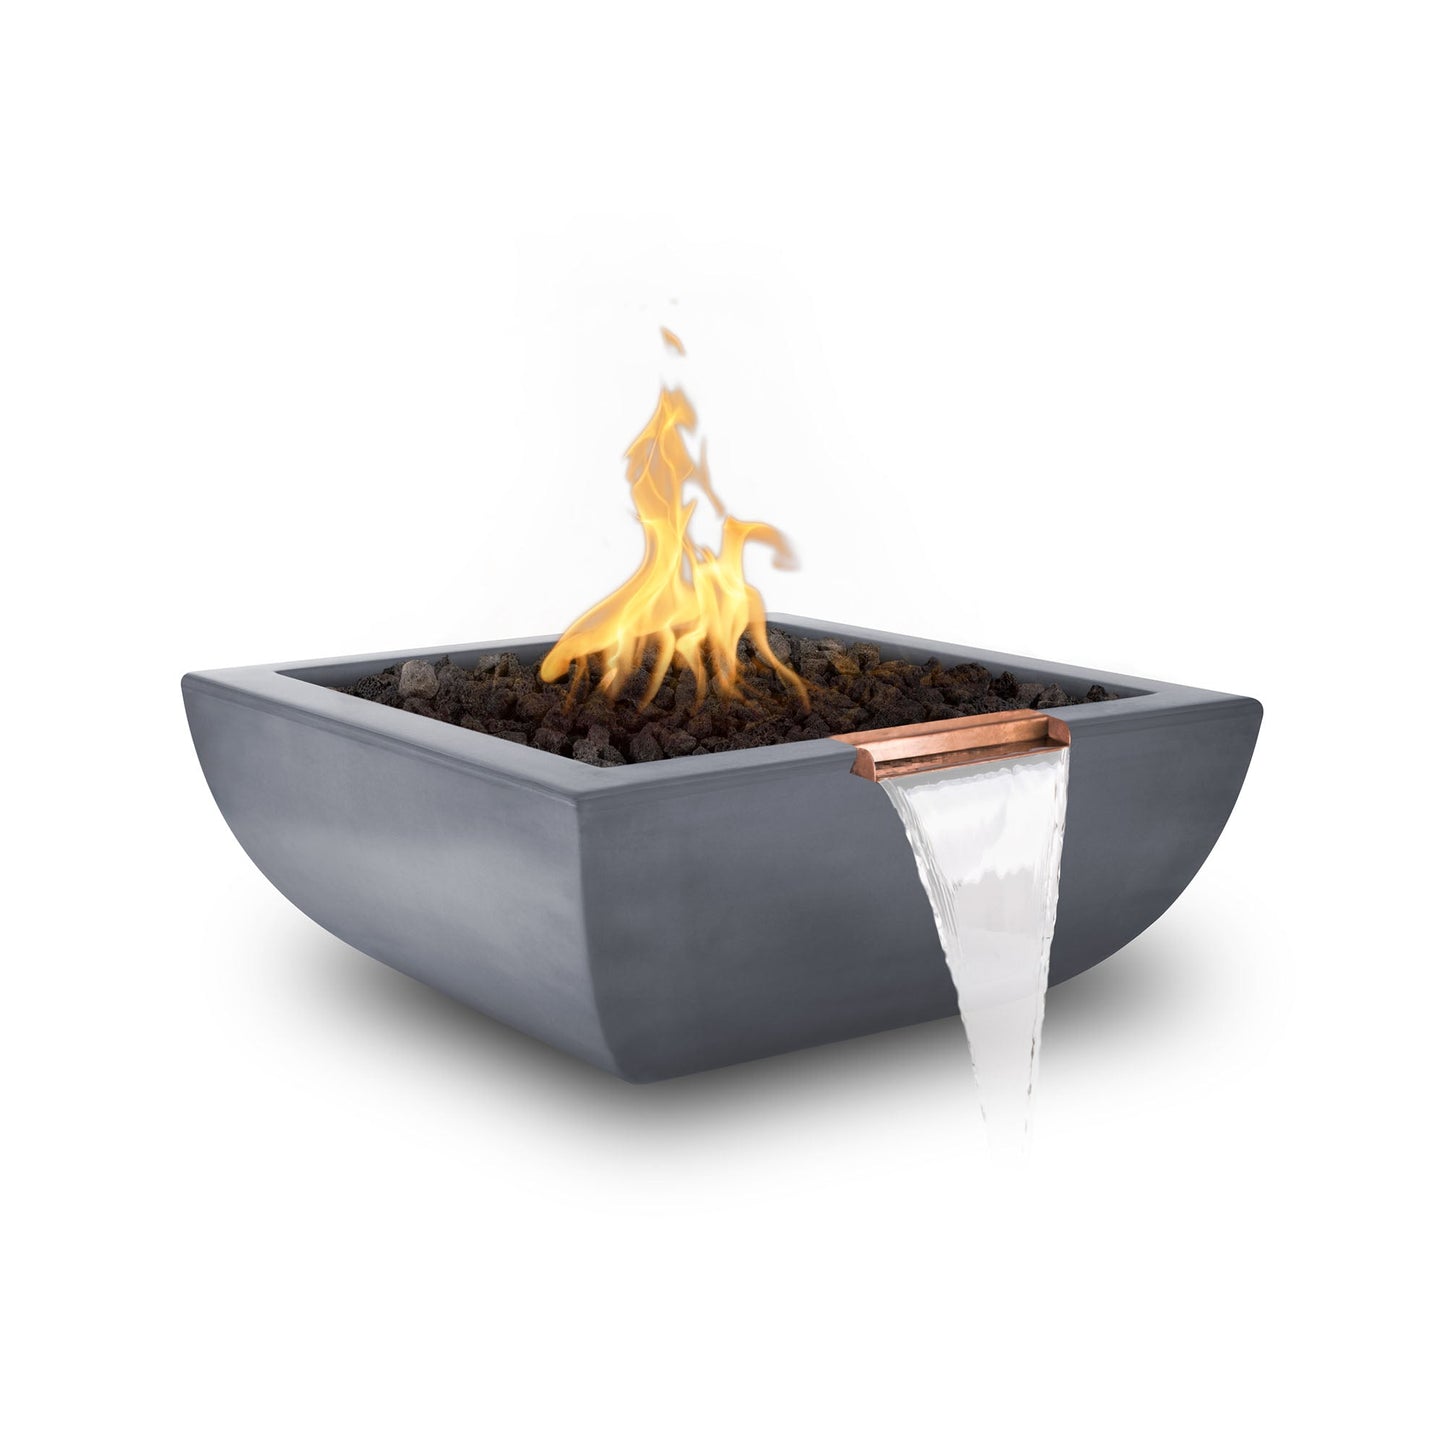 The Outdoor Plus Square Avalon 24" Metallic Pearl GFRC Concrete Natural Gas Fire & Water Bowl with Match Lit with Flame Sense Ignition